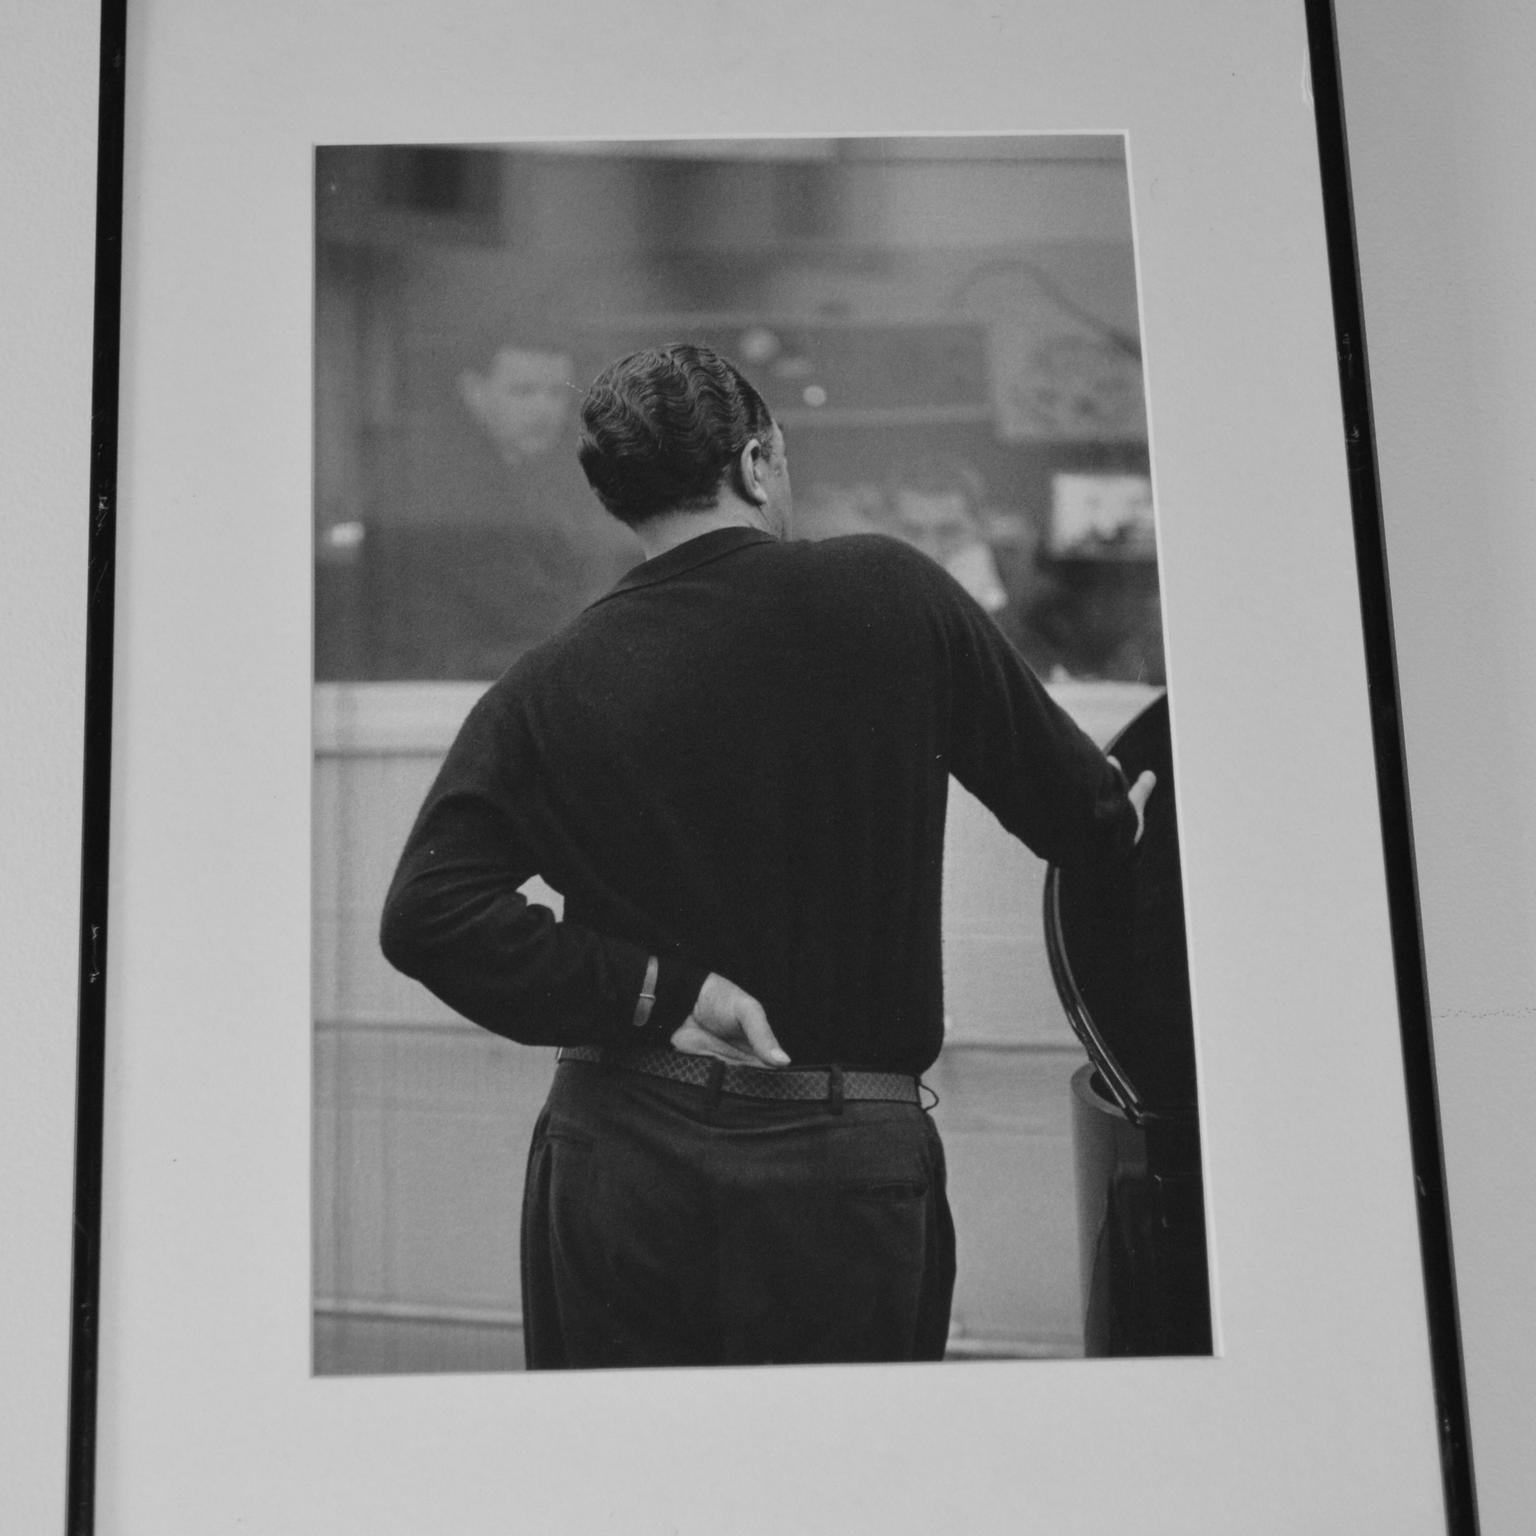 Duke Ellington Photograph by Don Hunstein In Good Condition For Sale In Portland, ME